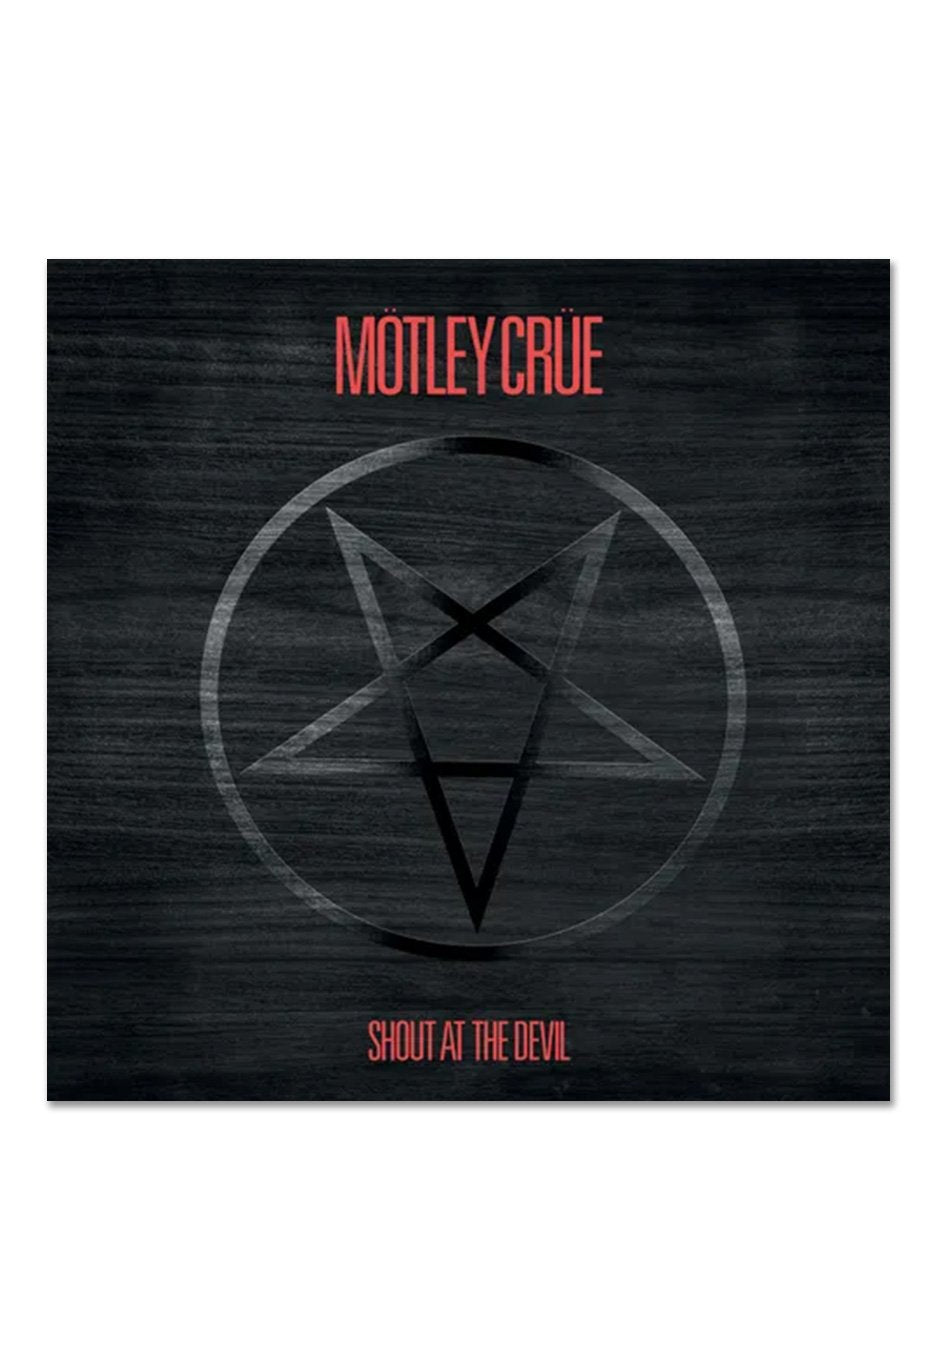 Mötley Crüe - Shout At The Devil (40th Anniversary) - Colored 4 Vinyl